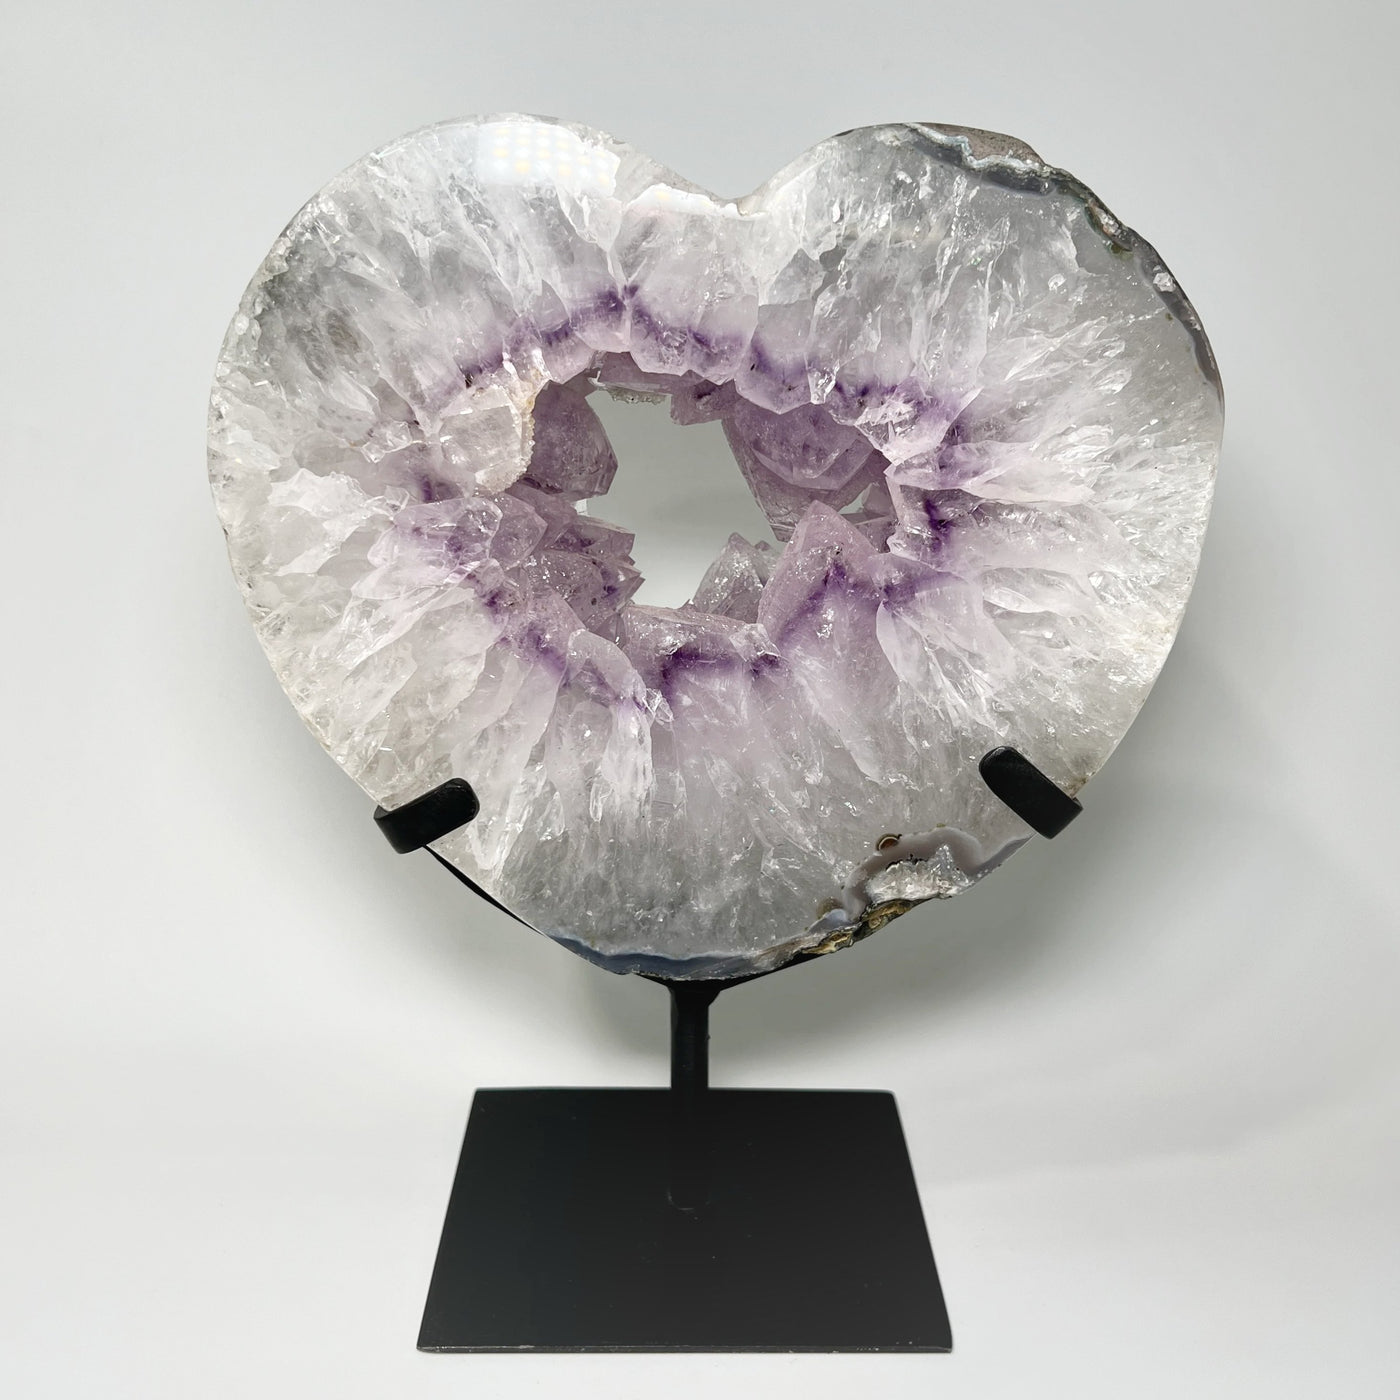 Amethyst Geode Heart Carving on Display Stand